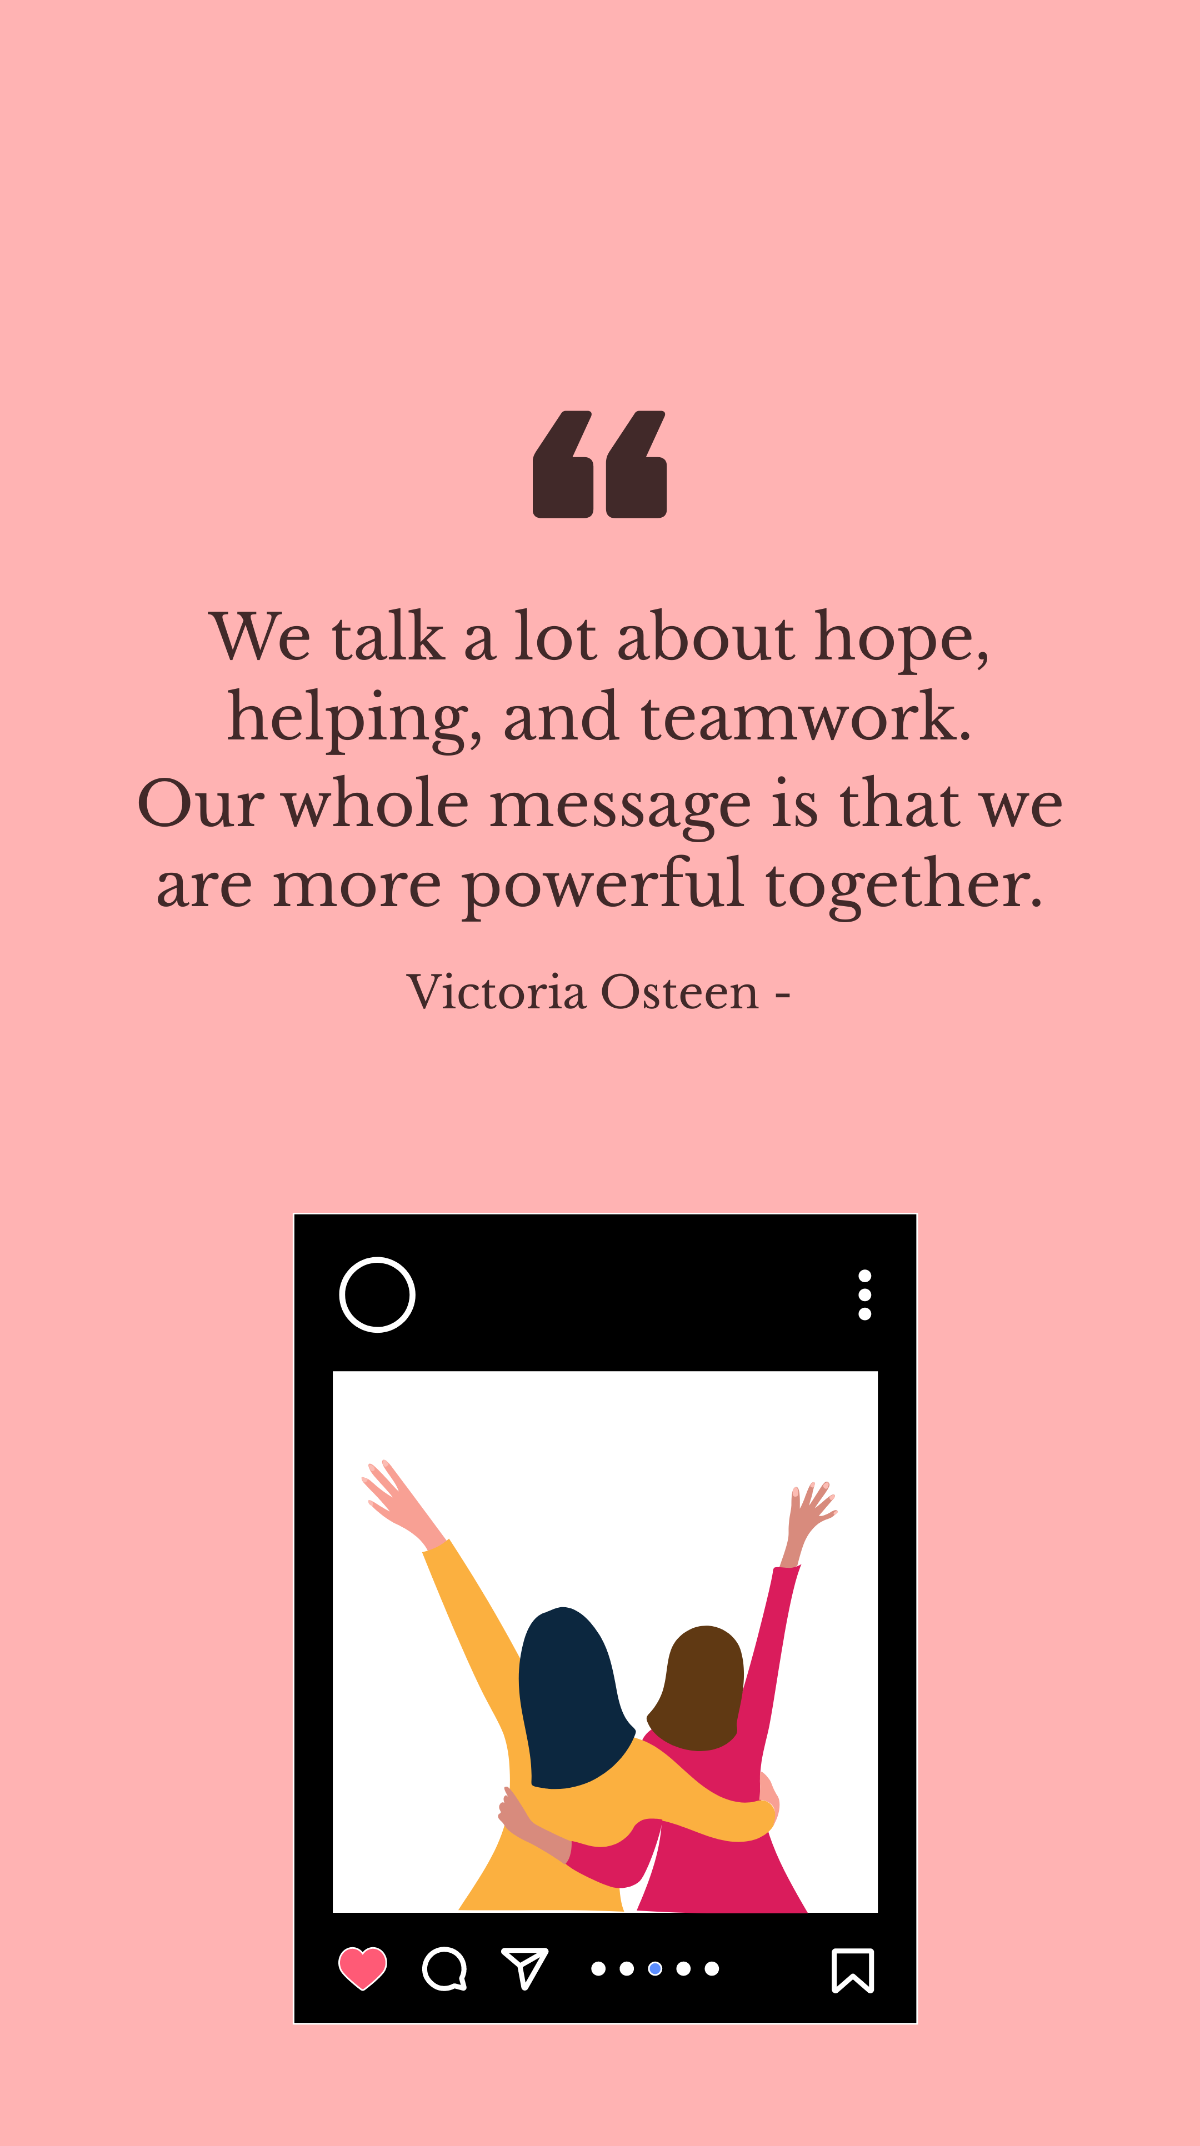 Free Victoria Osteen - We talk a lot about hope, helping, and teamwork. Our whole message is that we are more powerful together. Template